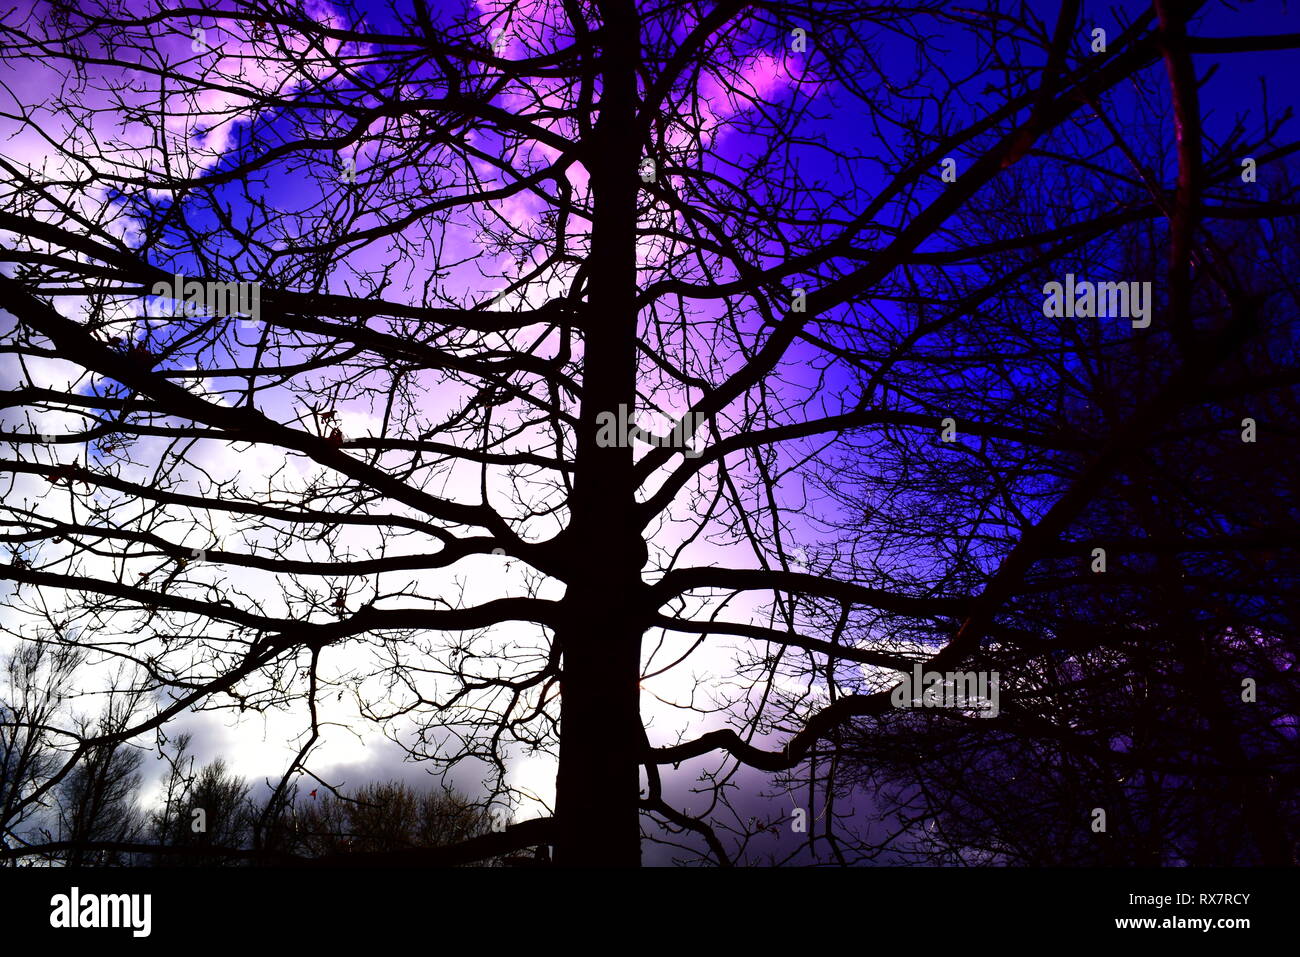 amsterdam - park with leafless winter tree & purple background Stock Photo